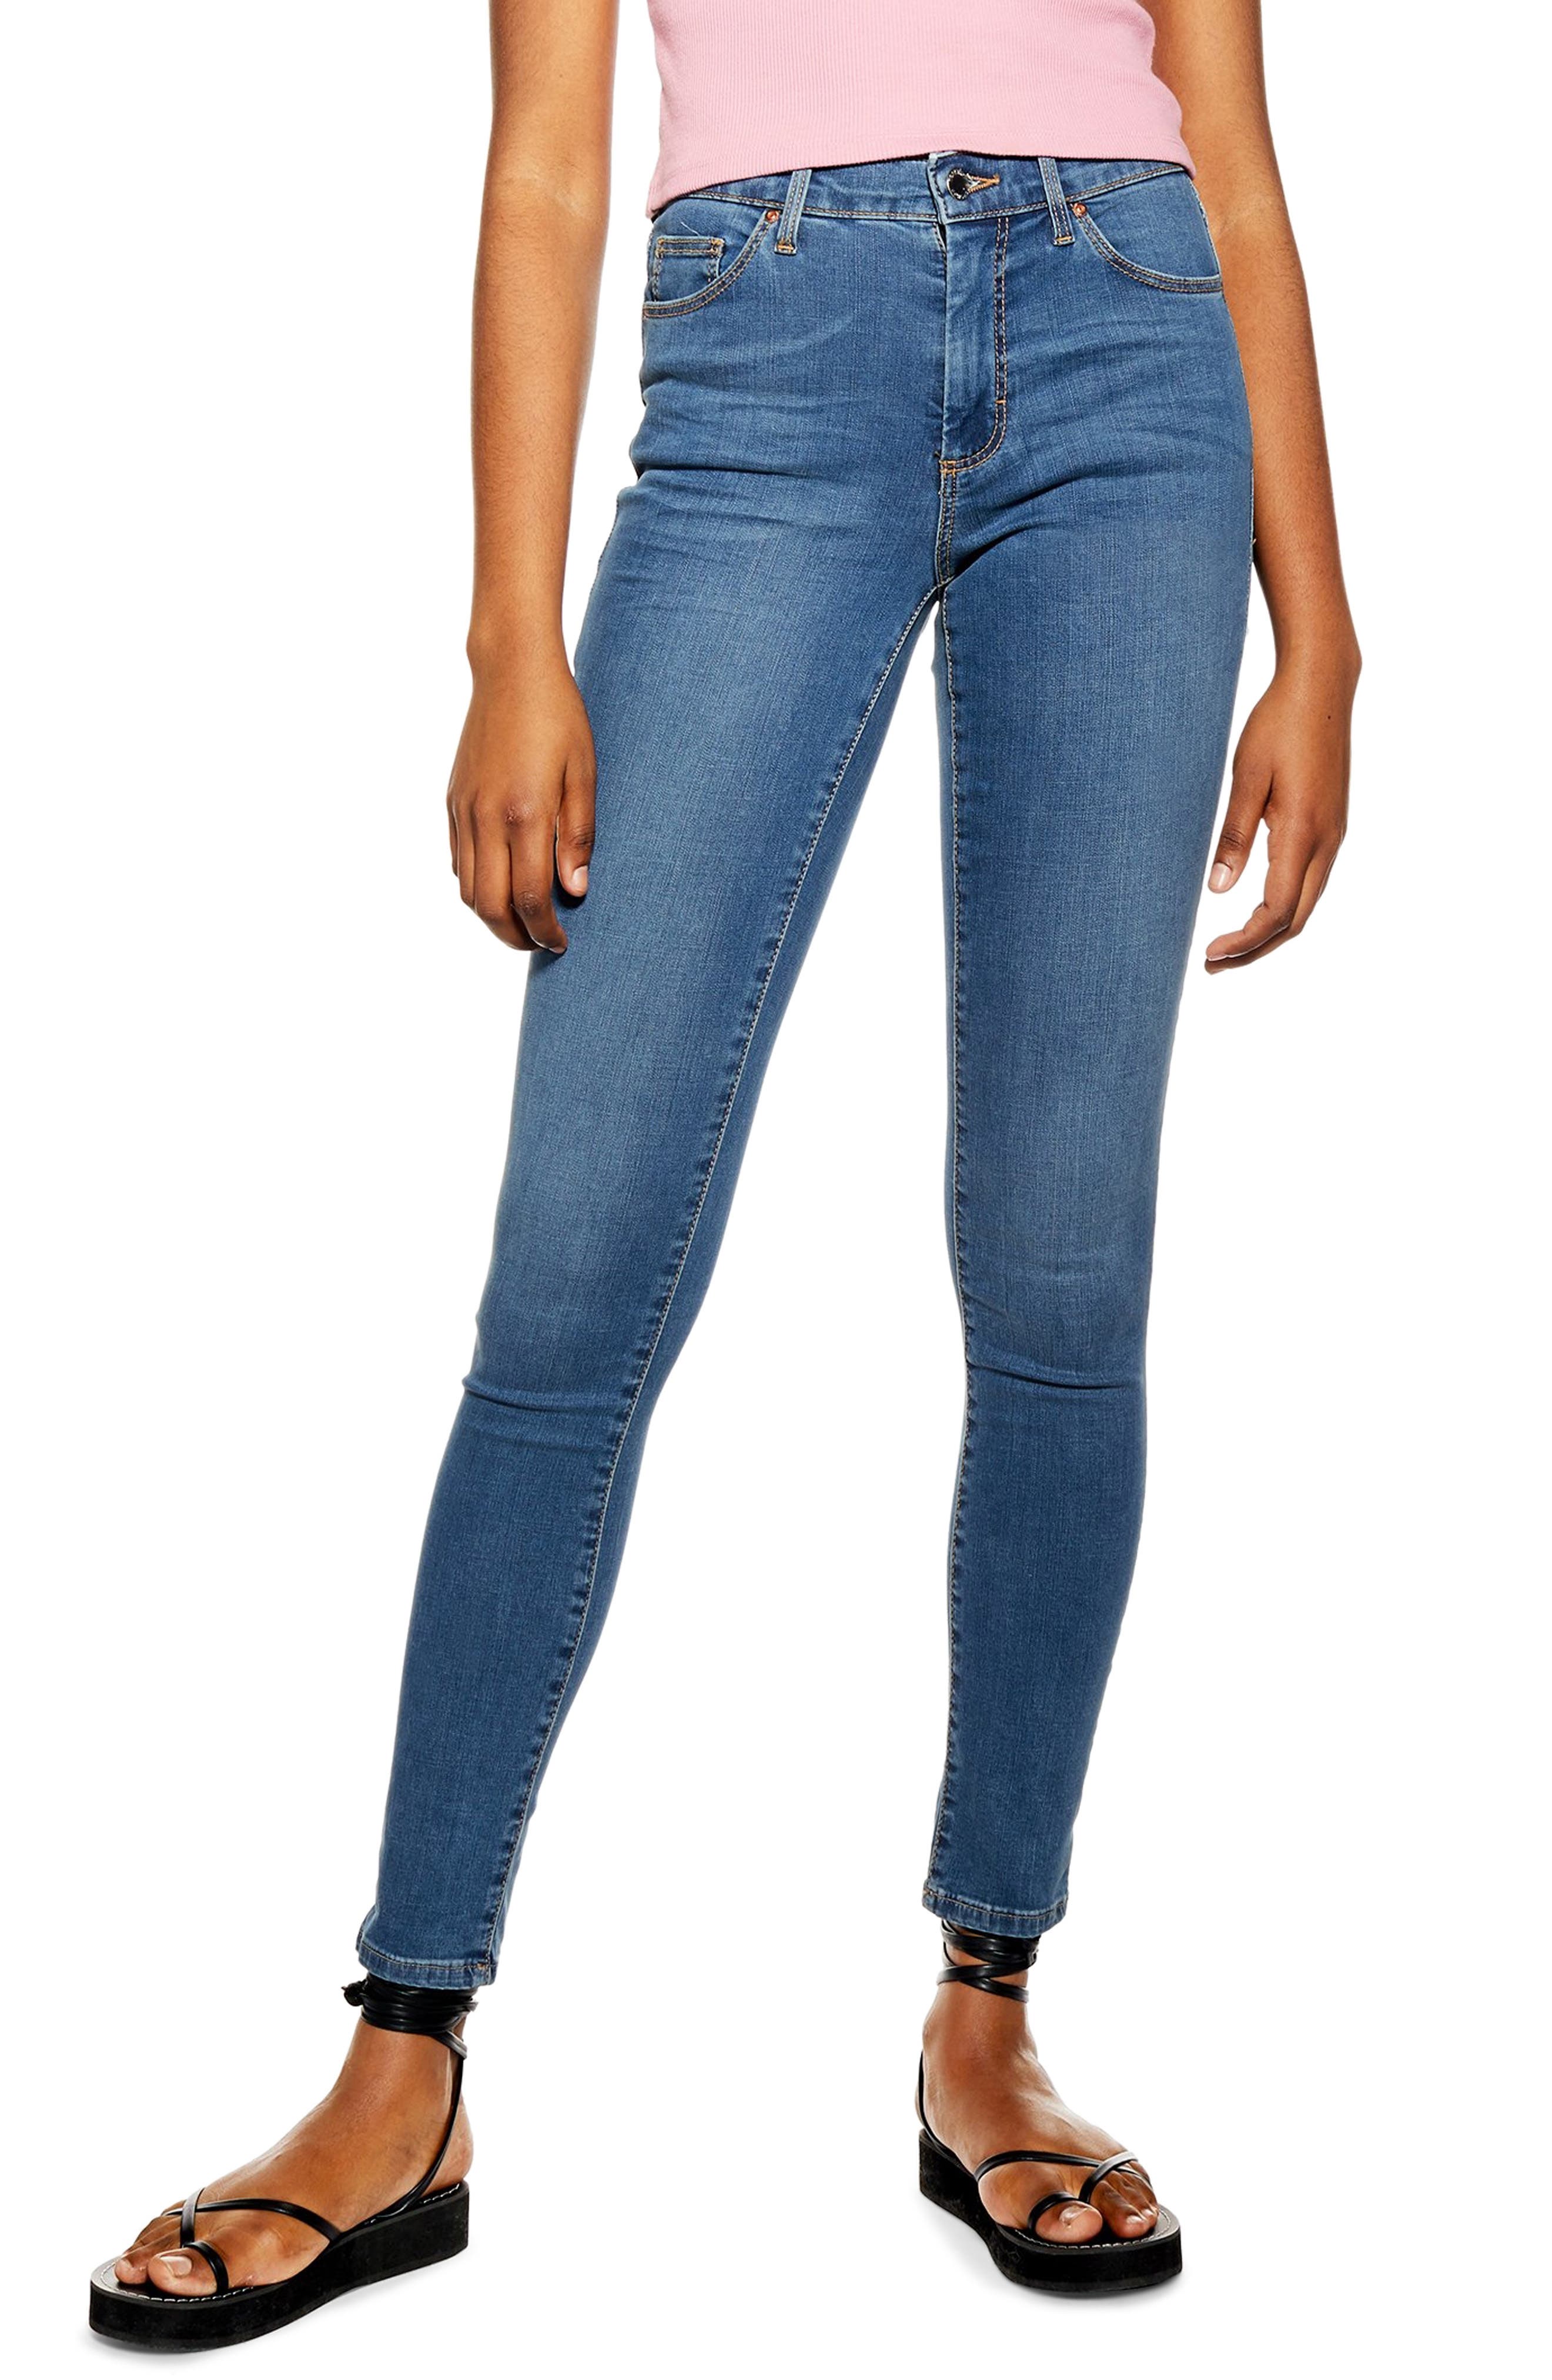 deals on womens jeans